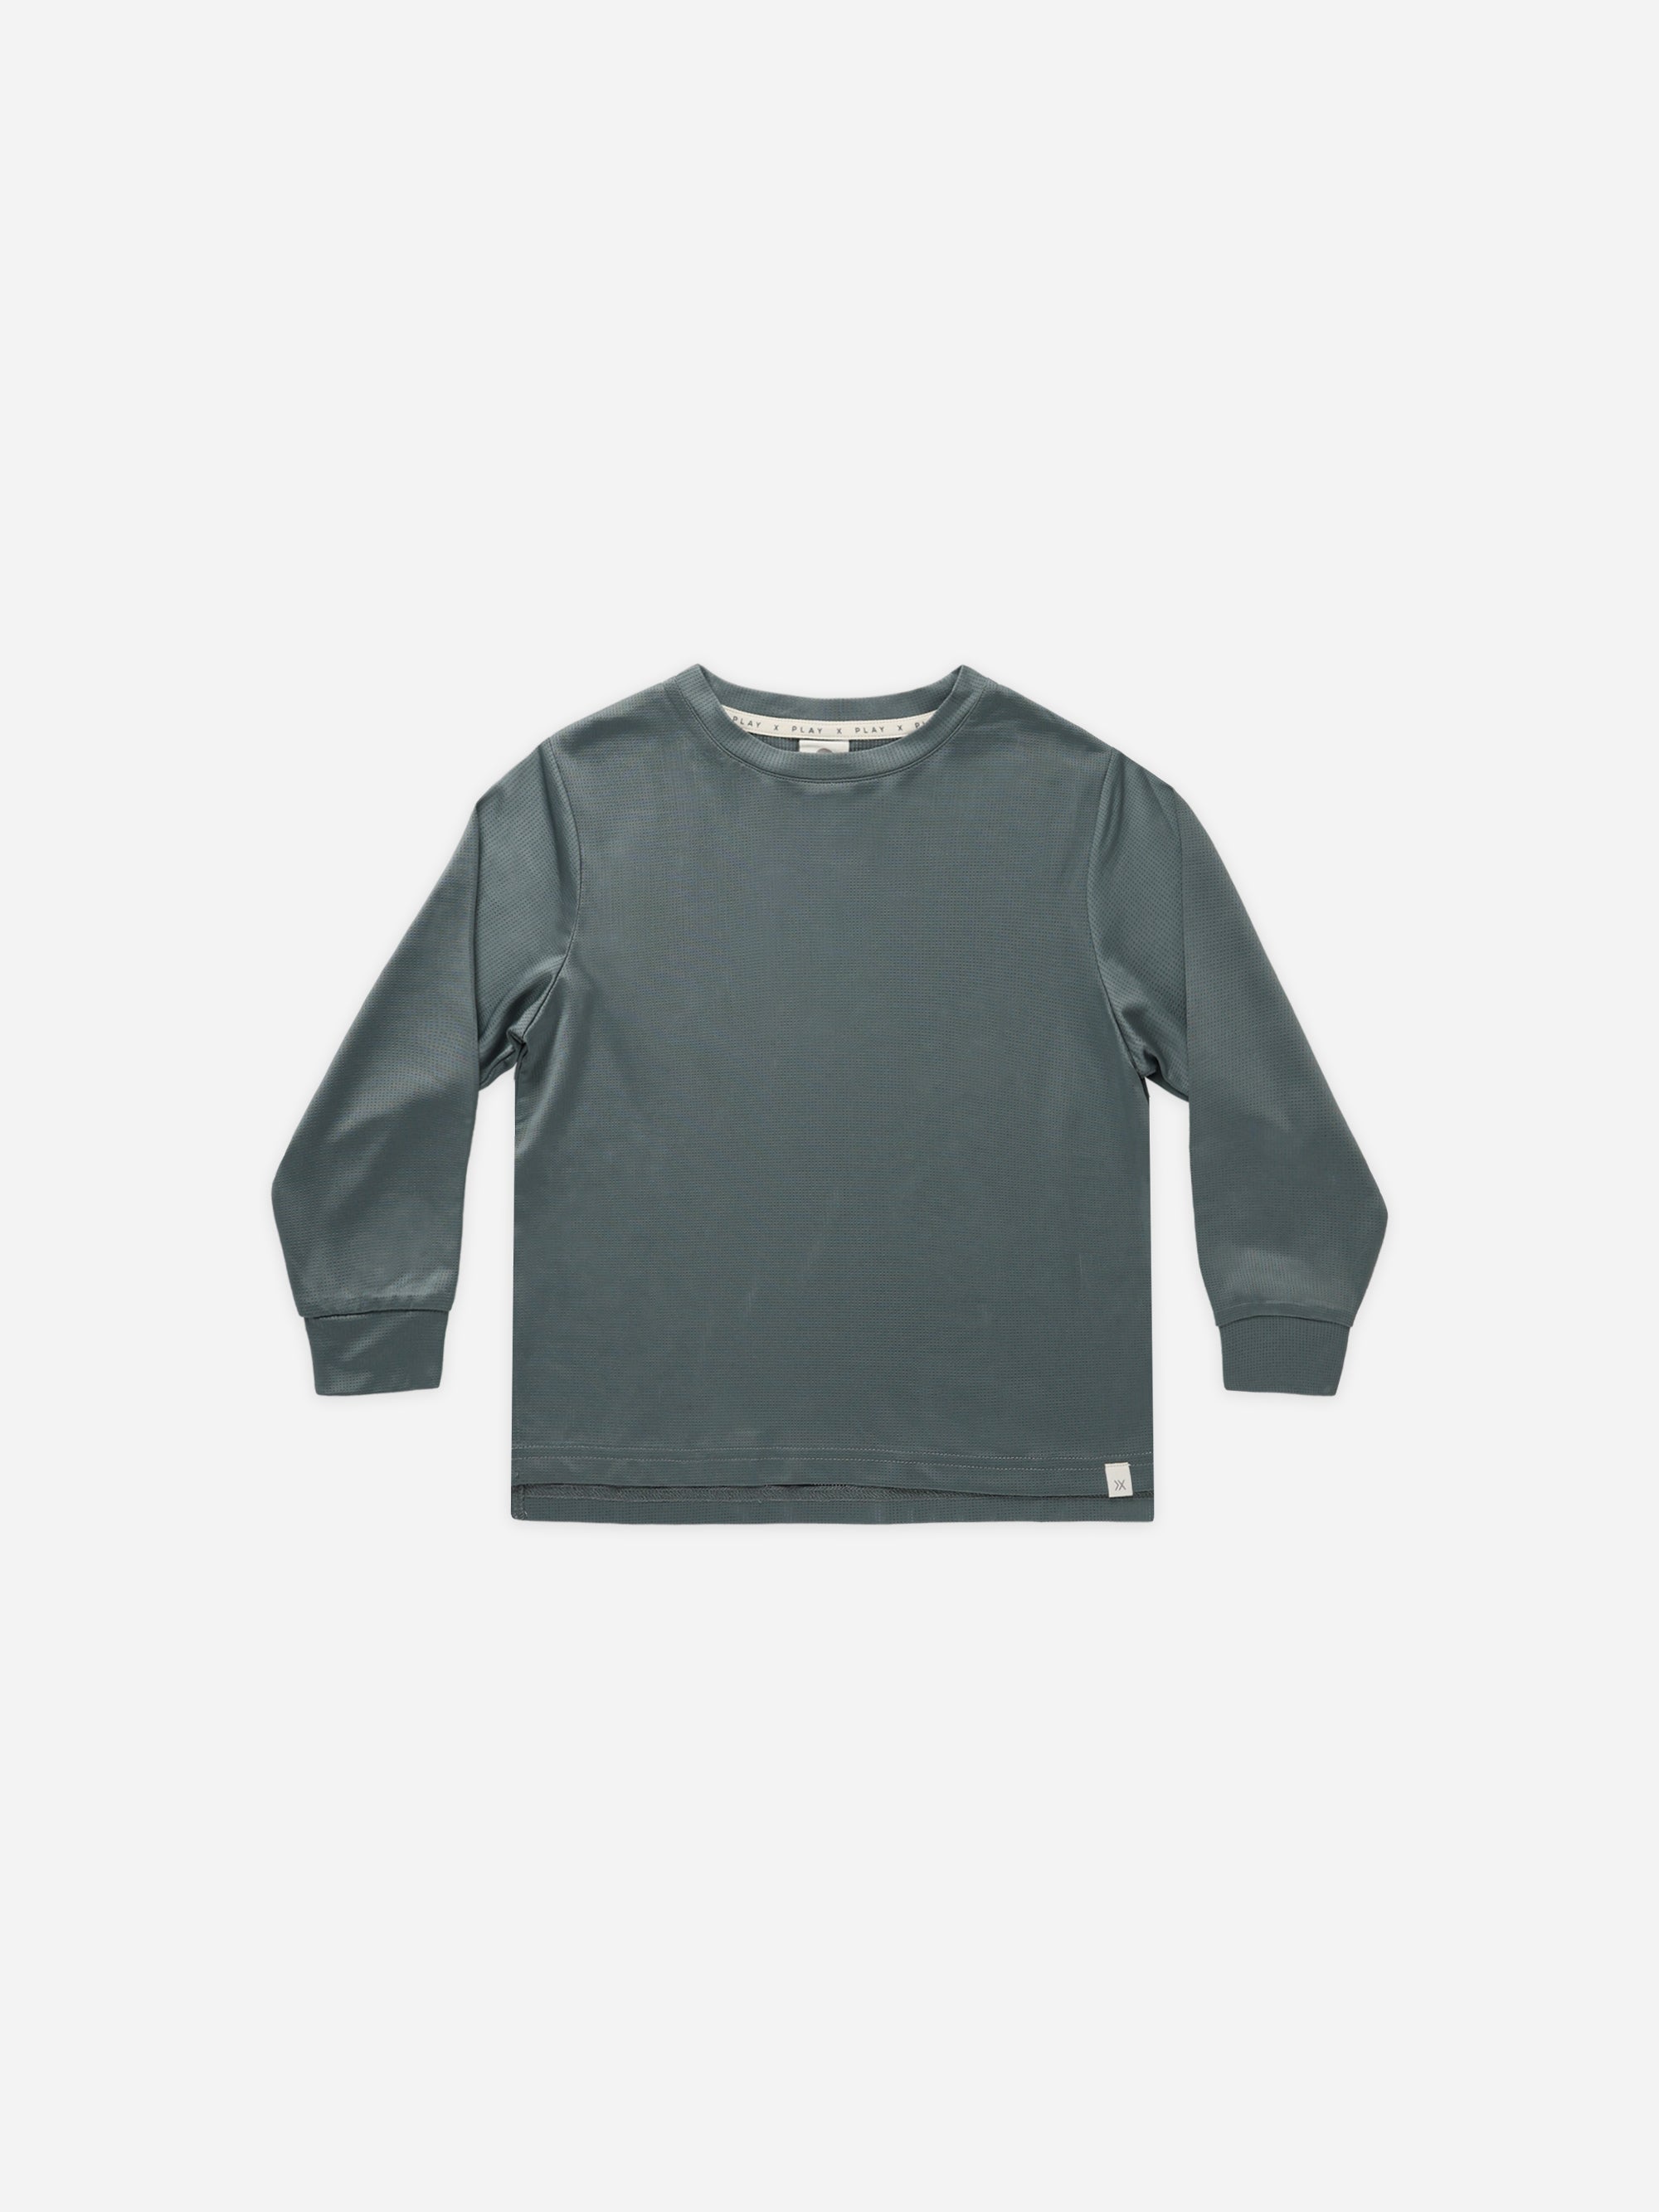 Cove Long Sleeve Tee || Indigo - Rylee + Cru | Kids Clothes | Trendy Baby Clothes | Modern Infant Outfits |